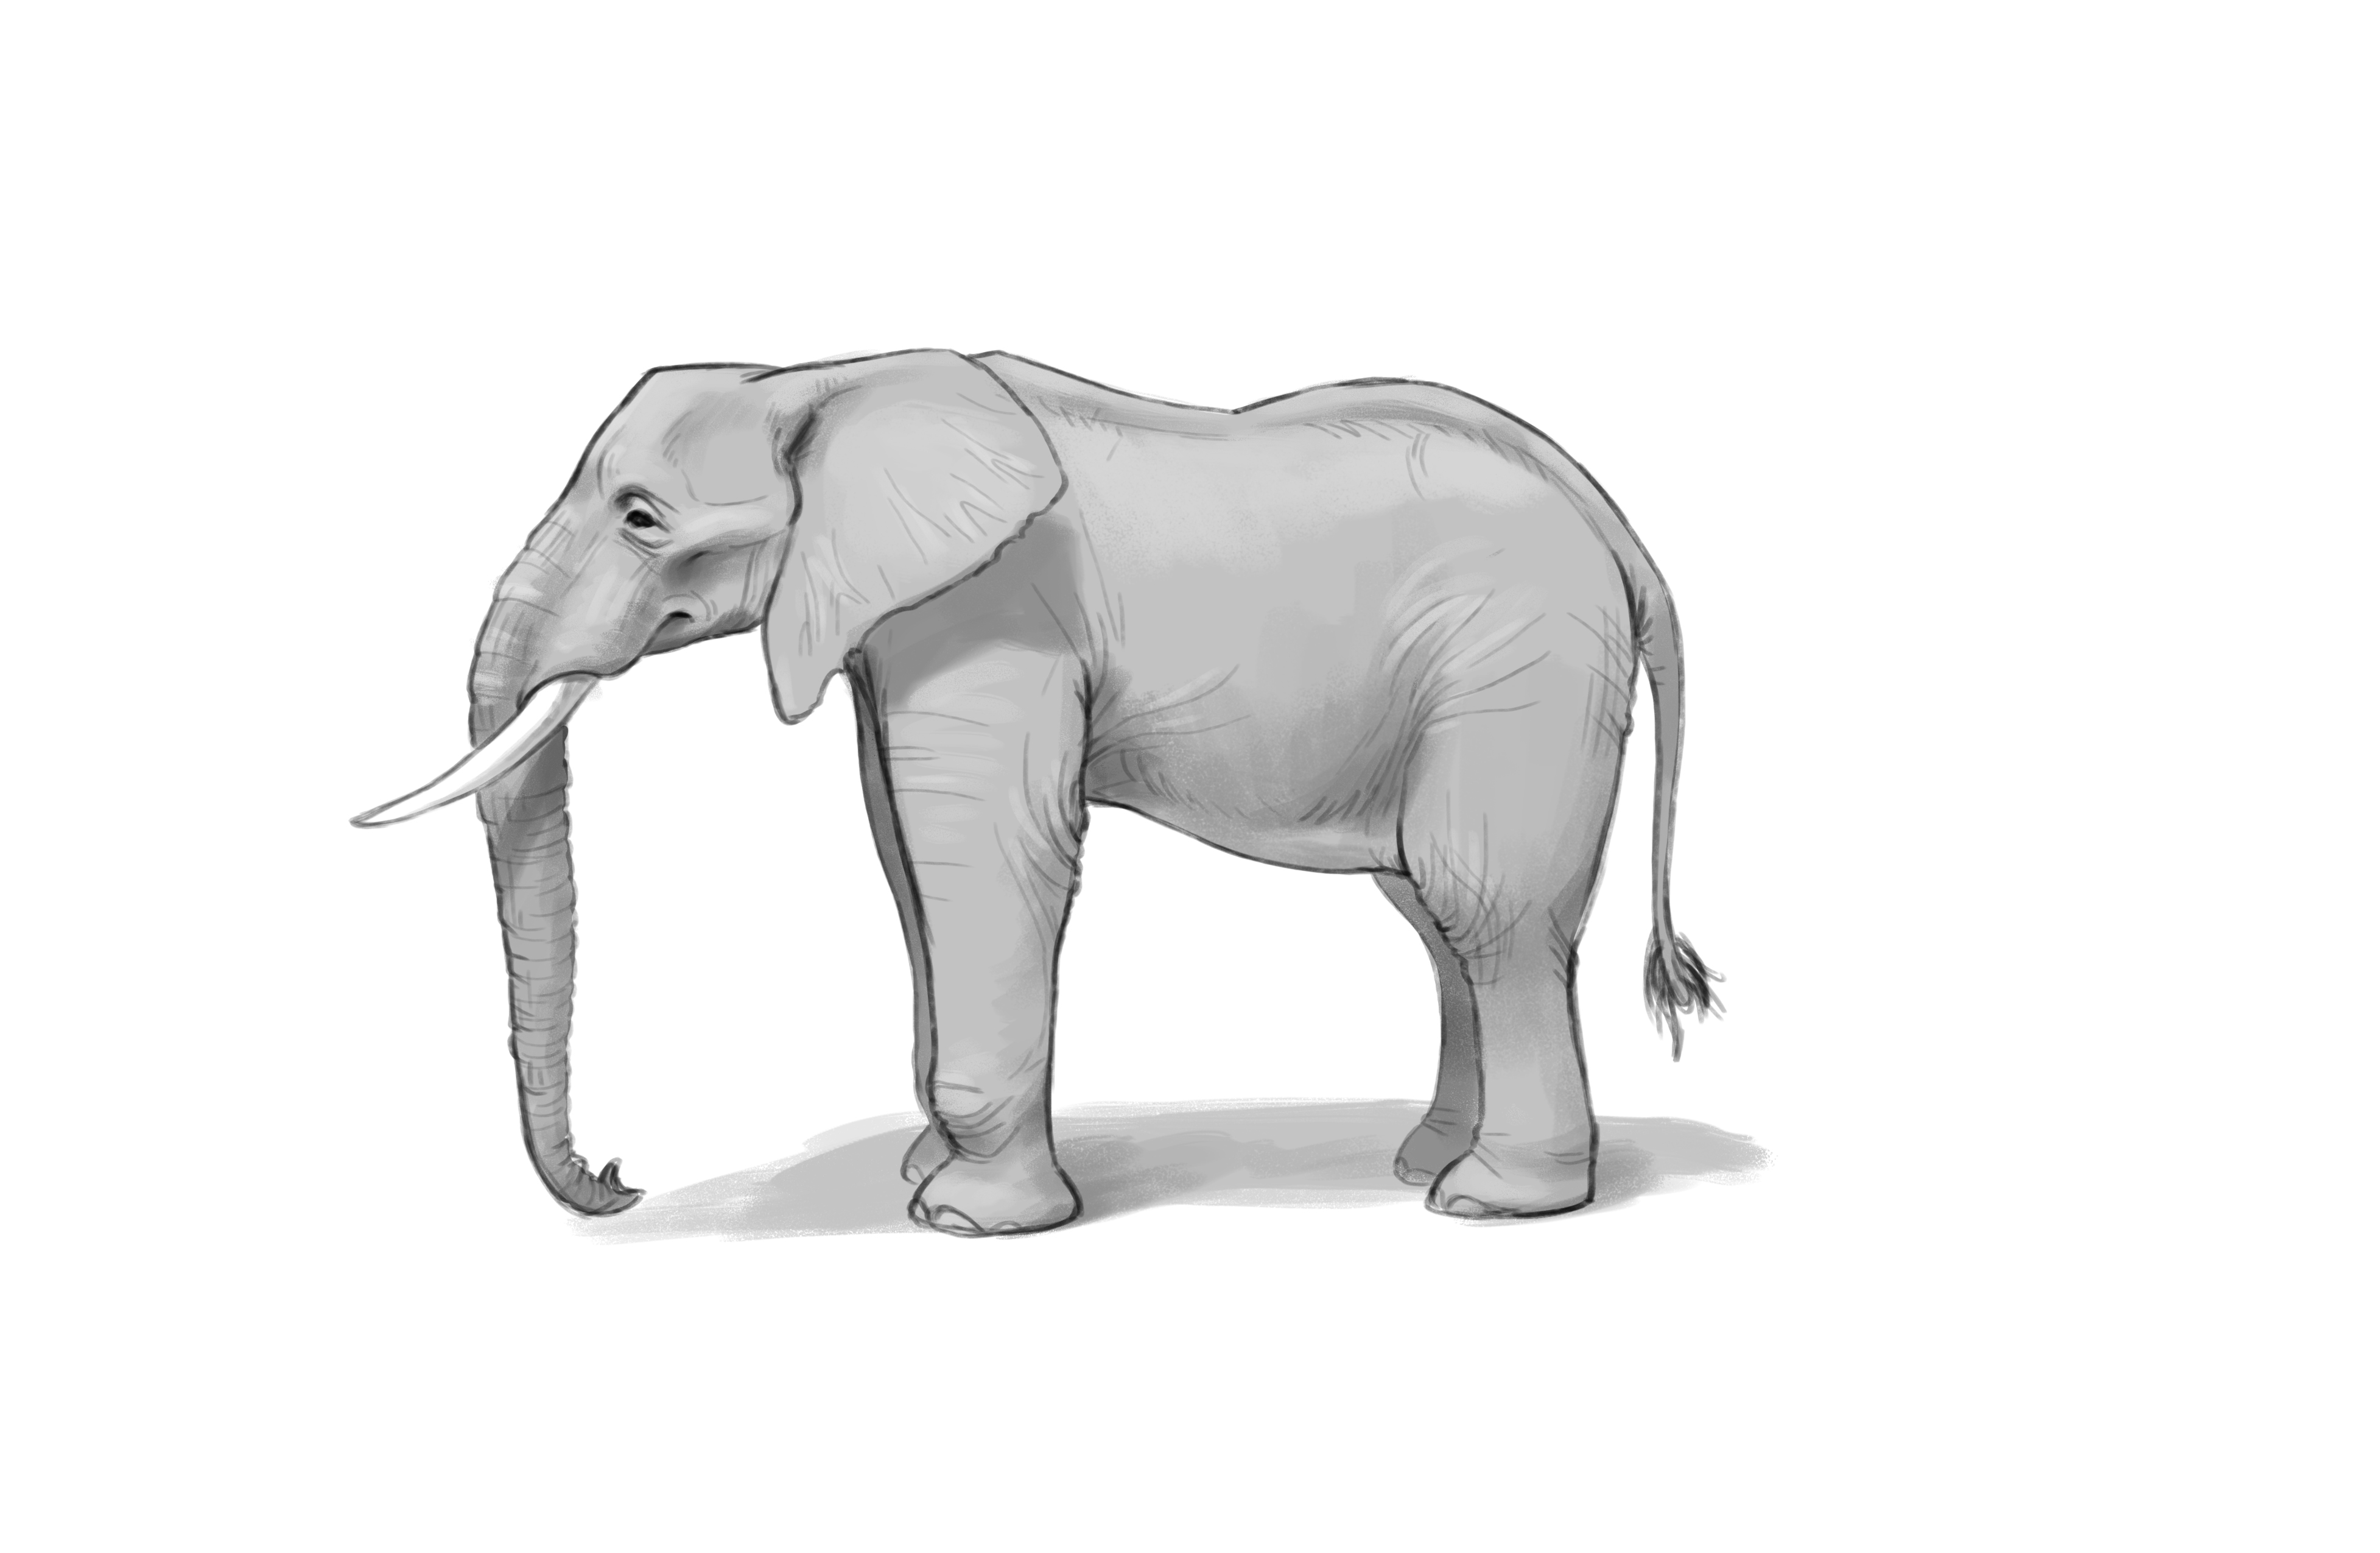 How to draw: an elephant